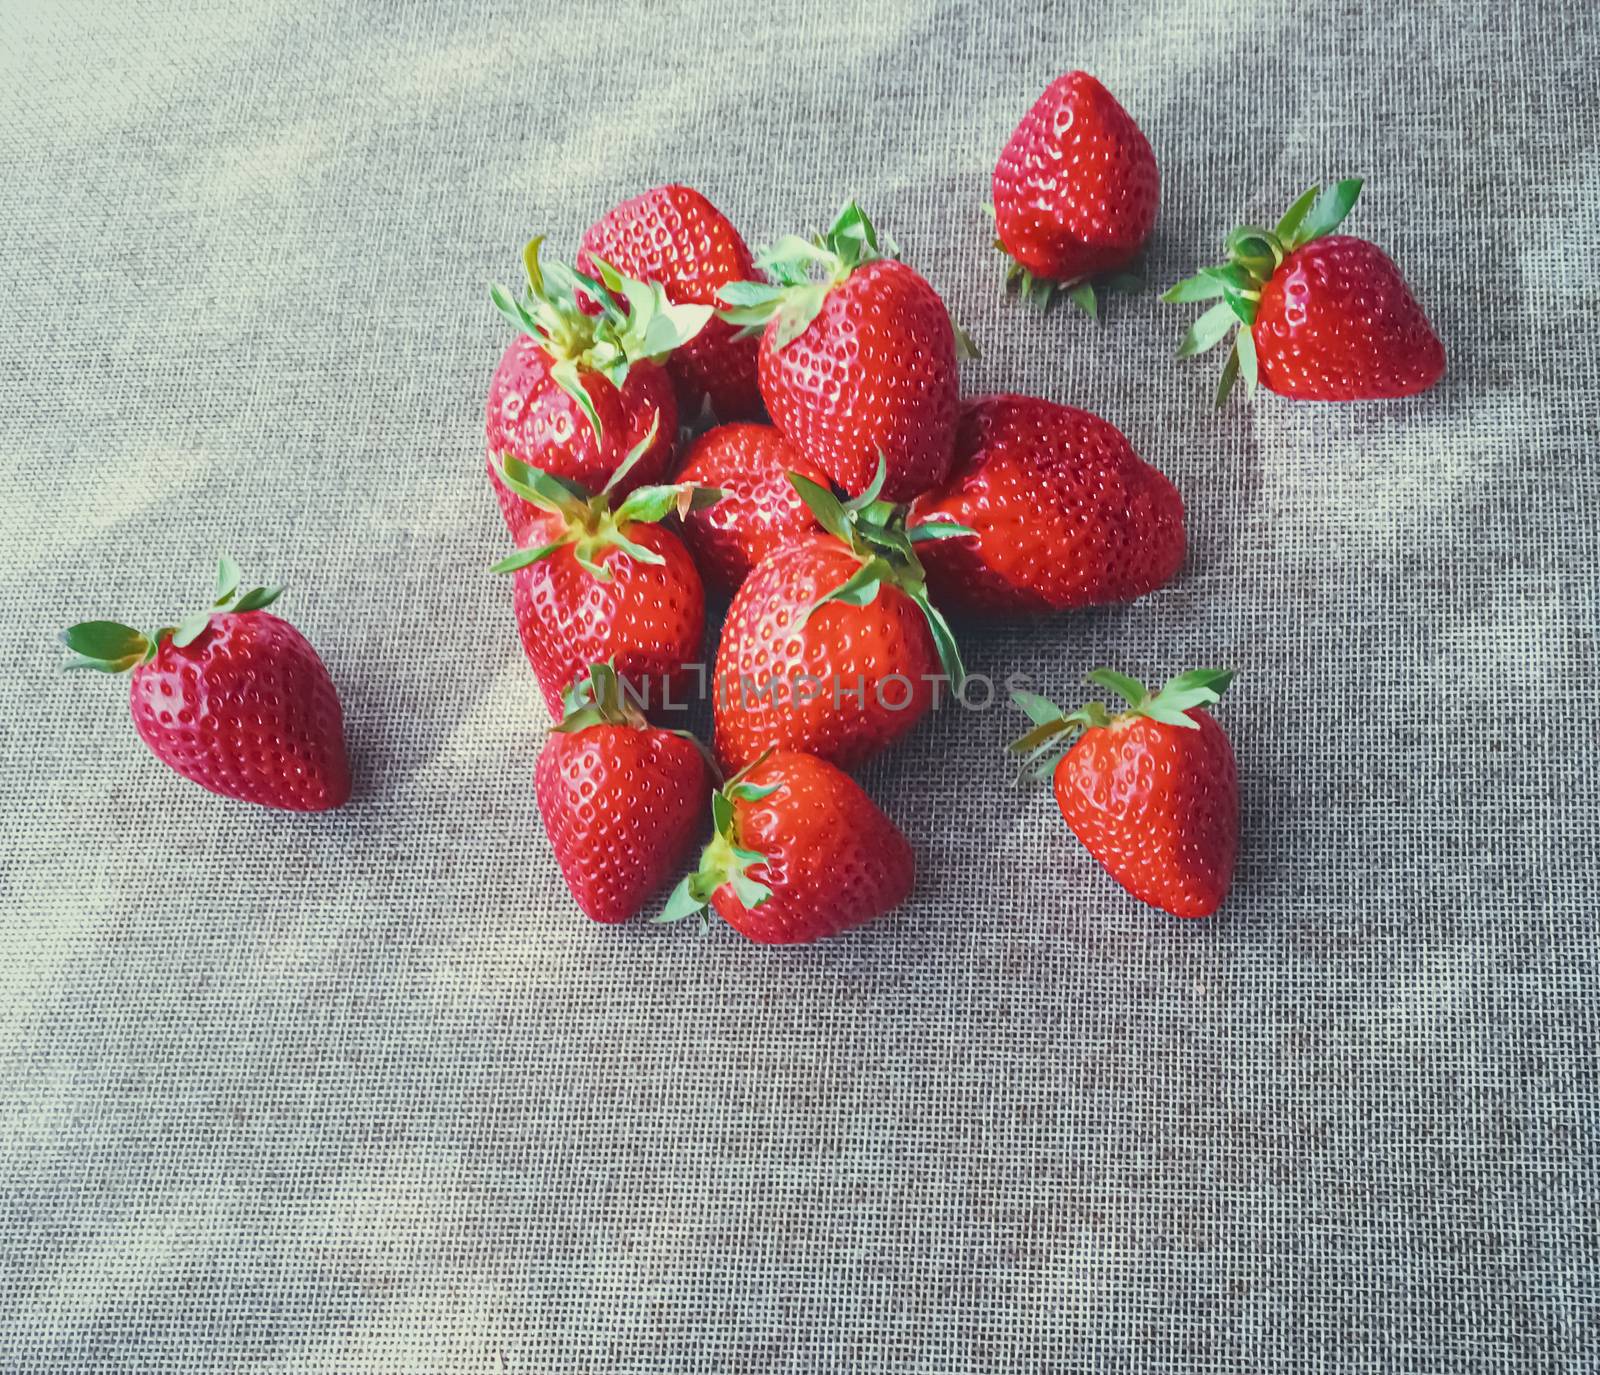 Organic strawberries on rustic linen background, fruit farming and agriculture